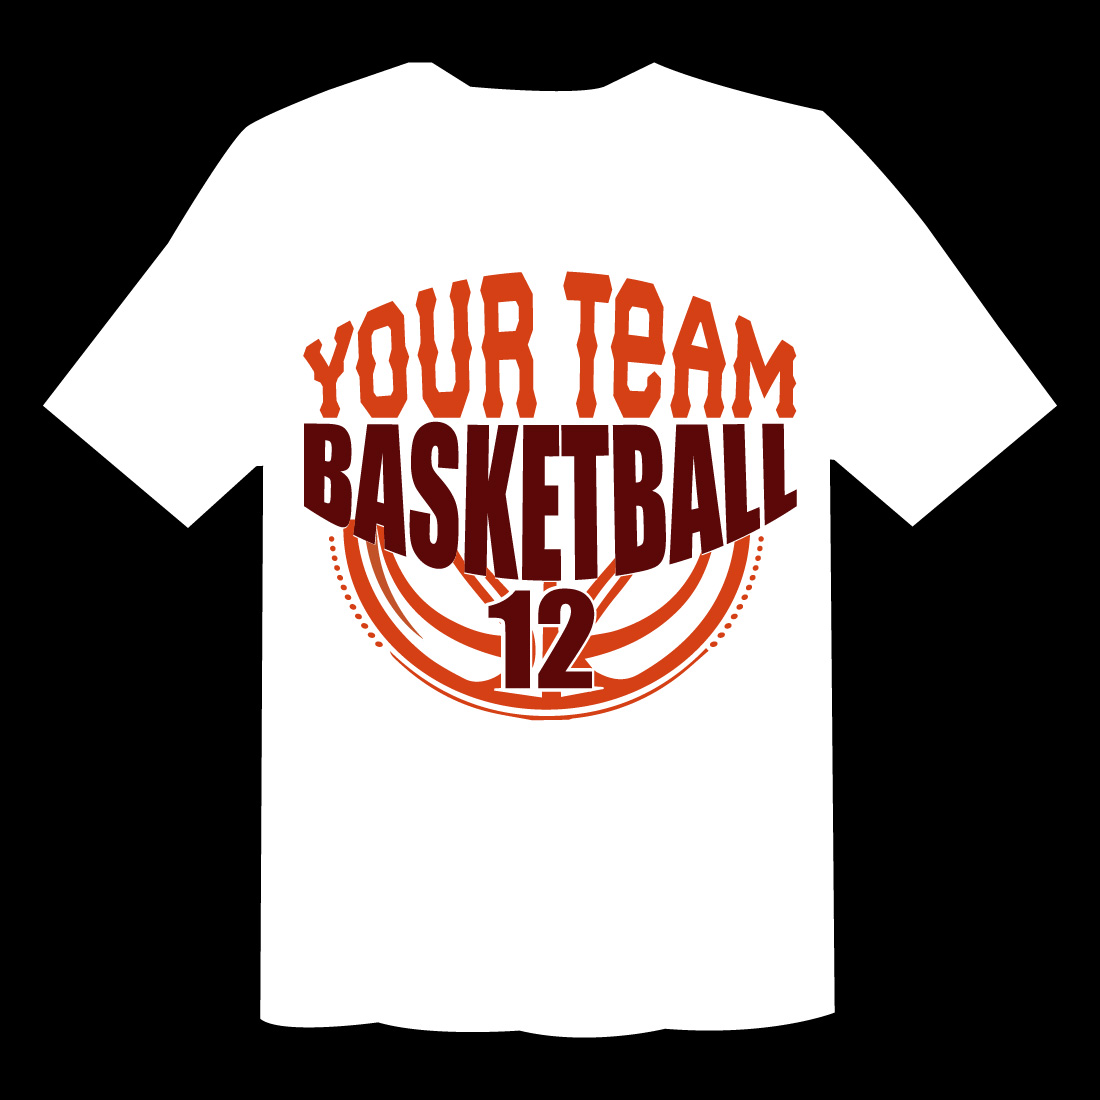 Your Team Basketball 12 T Shirt cover image.